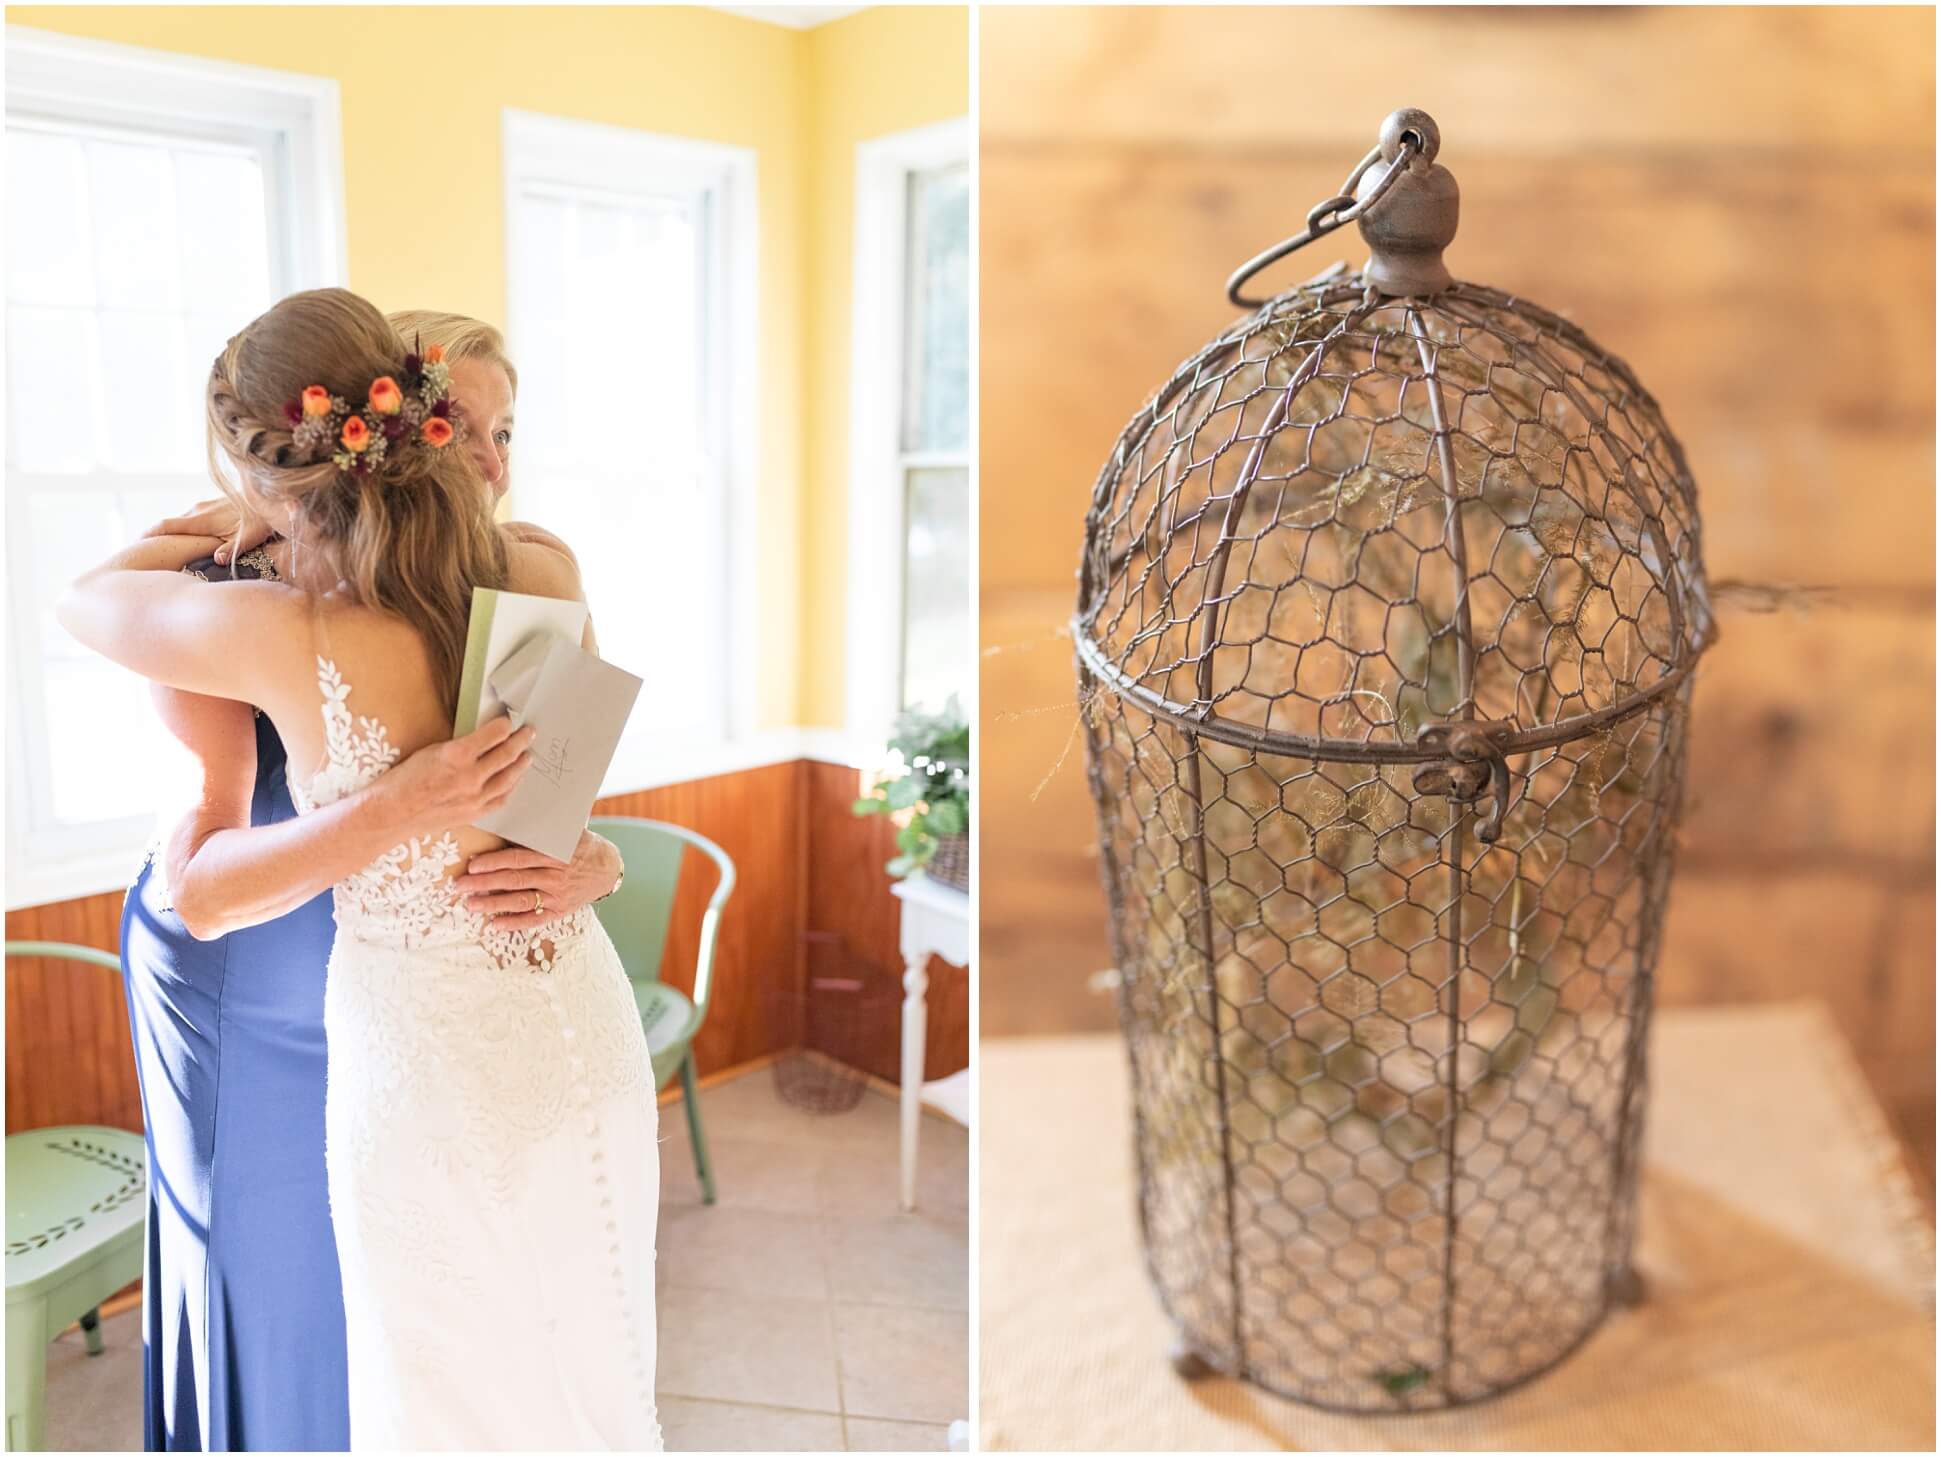 LEFT IMAGE: BRIDE AND MOTHER OF THE BRIDE, RIGHT IMAGE: BIRD CAGE DETAIL